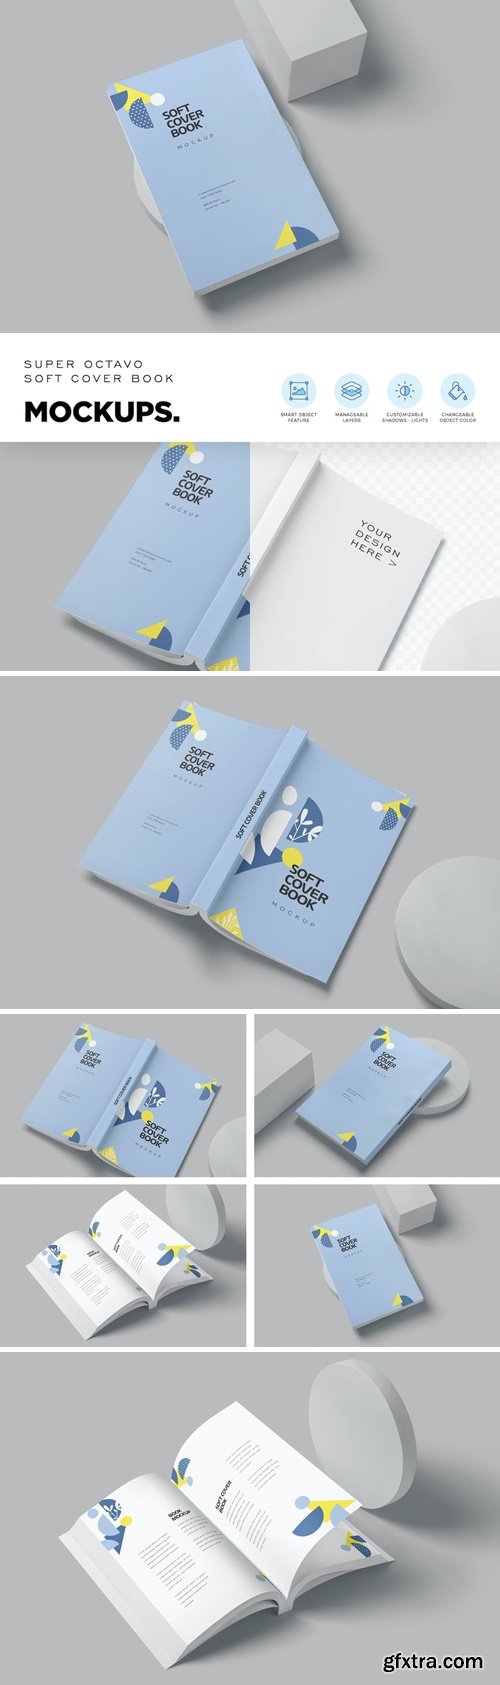 Super Octavo Softcover Book Mockups VW3UQCD